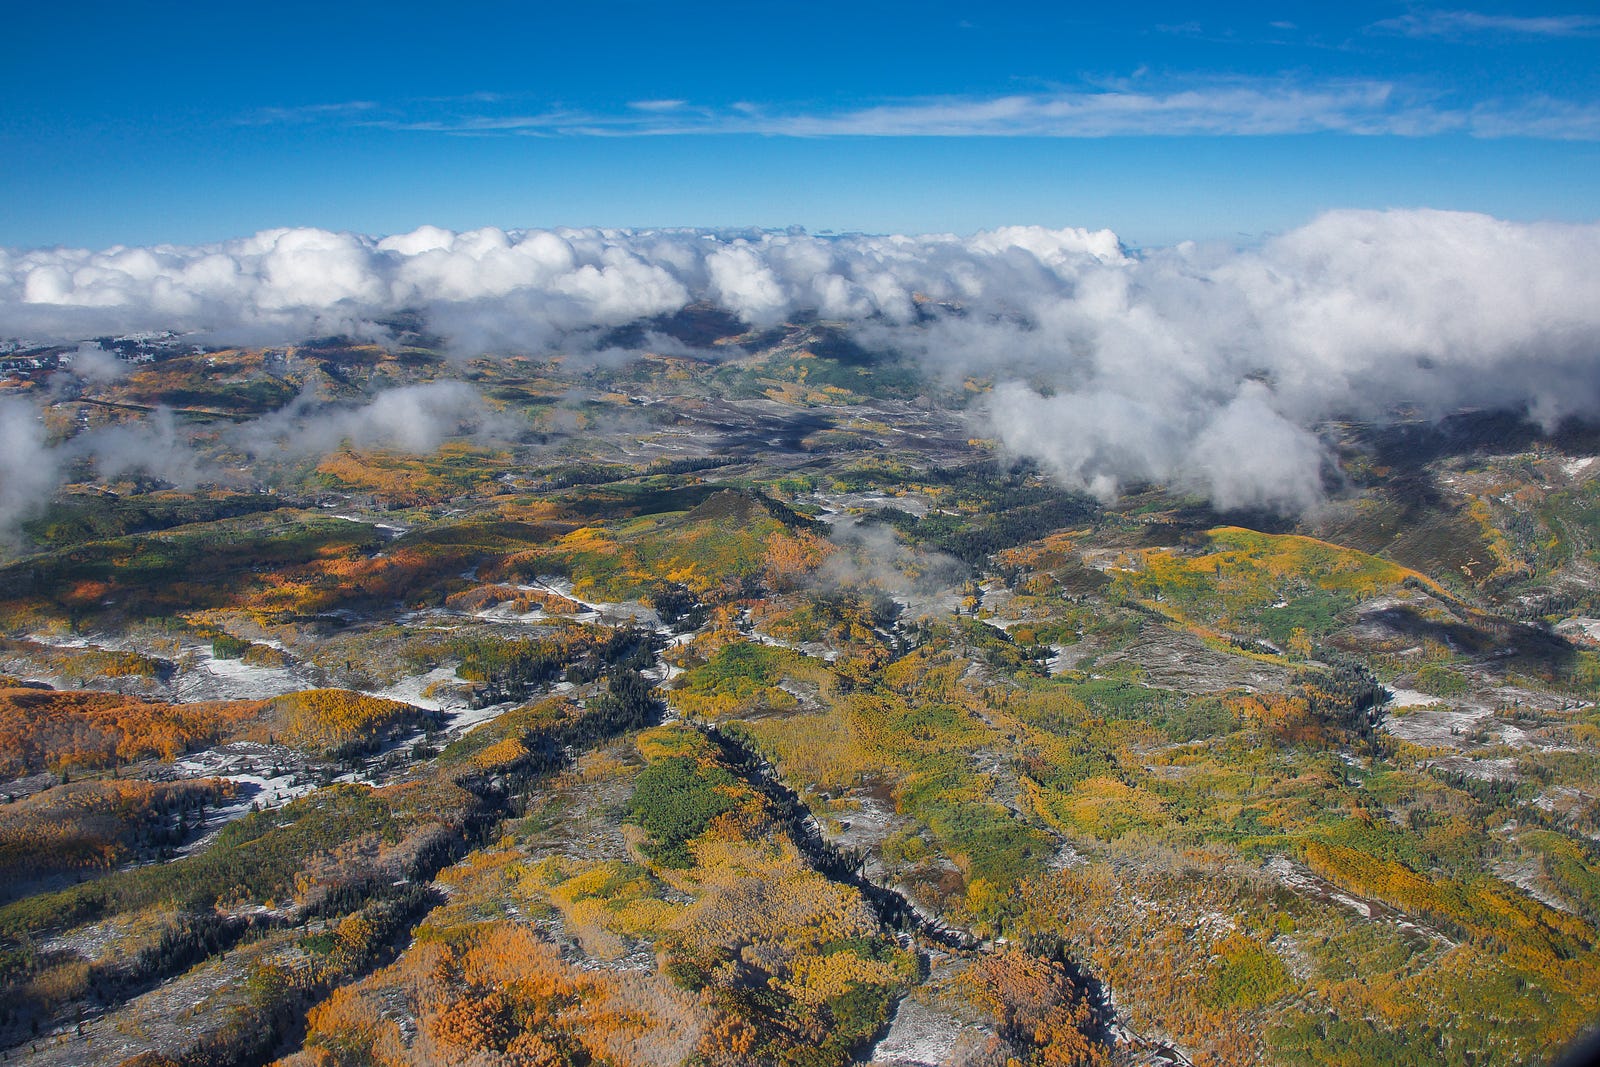 An aerial photo with colorful fall foliage, rivers, and partial cloud cover.